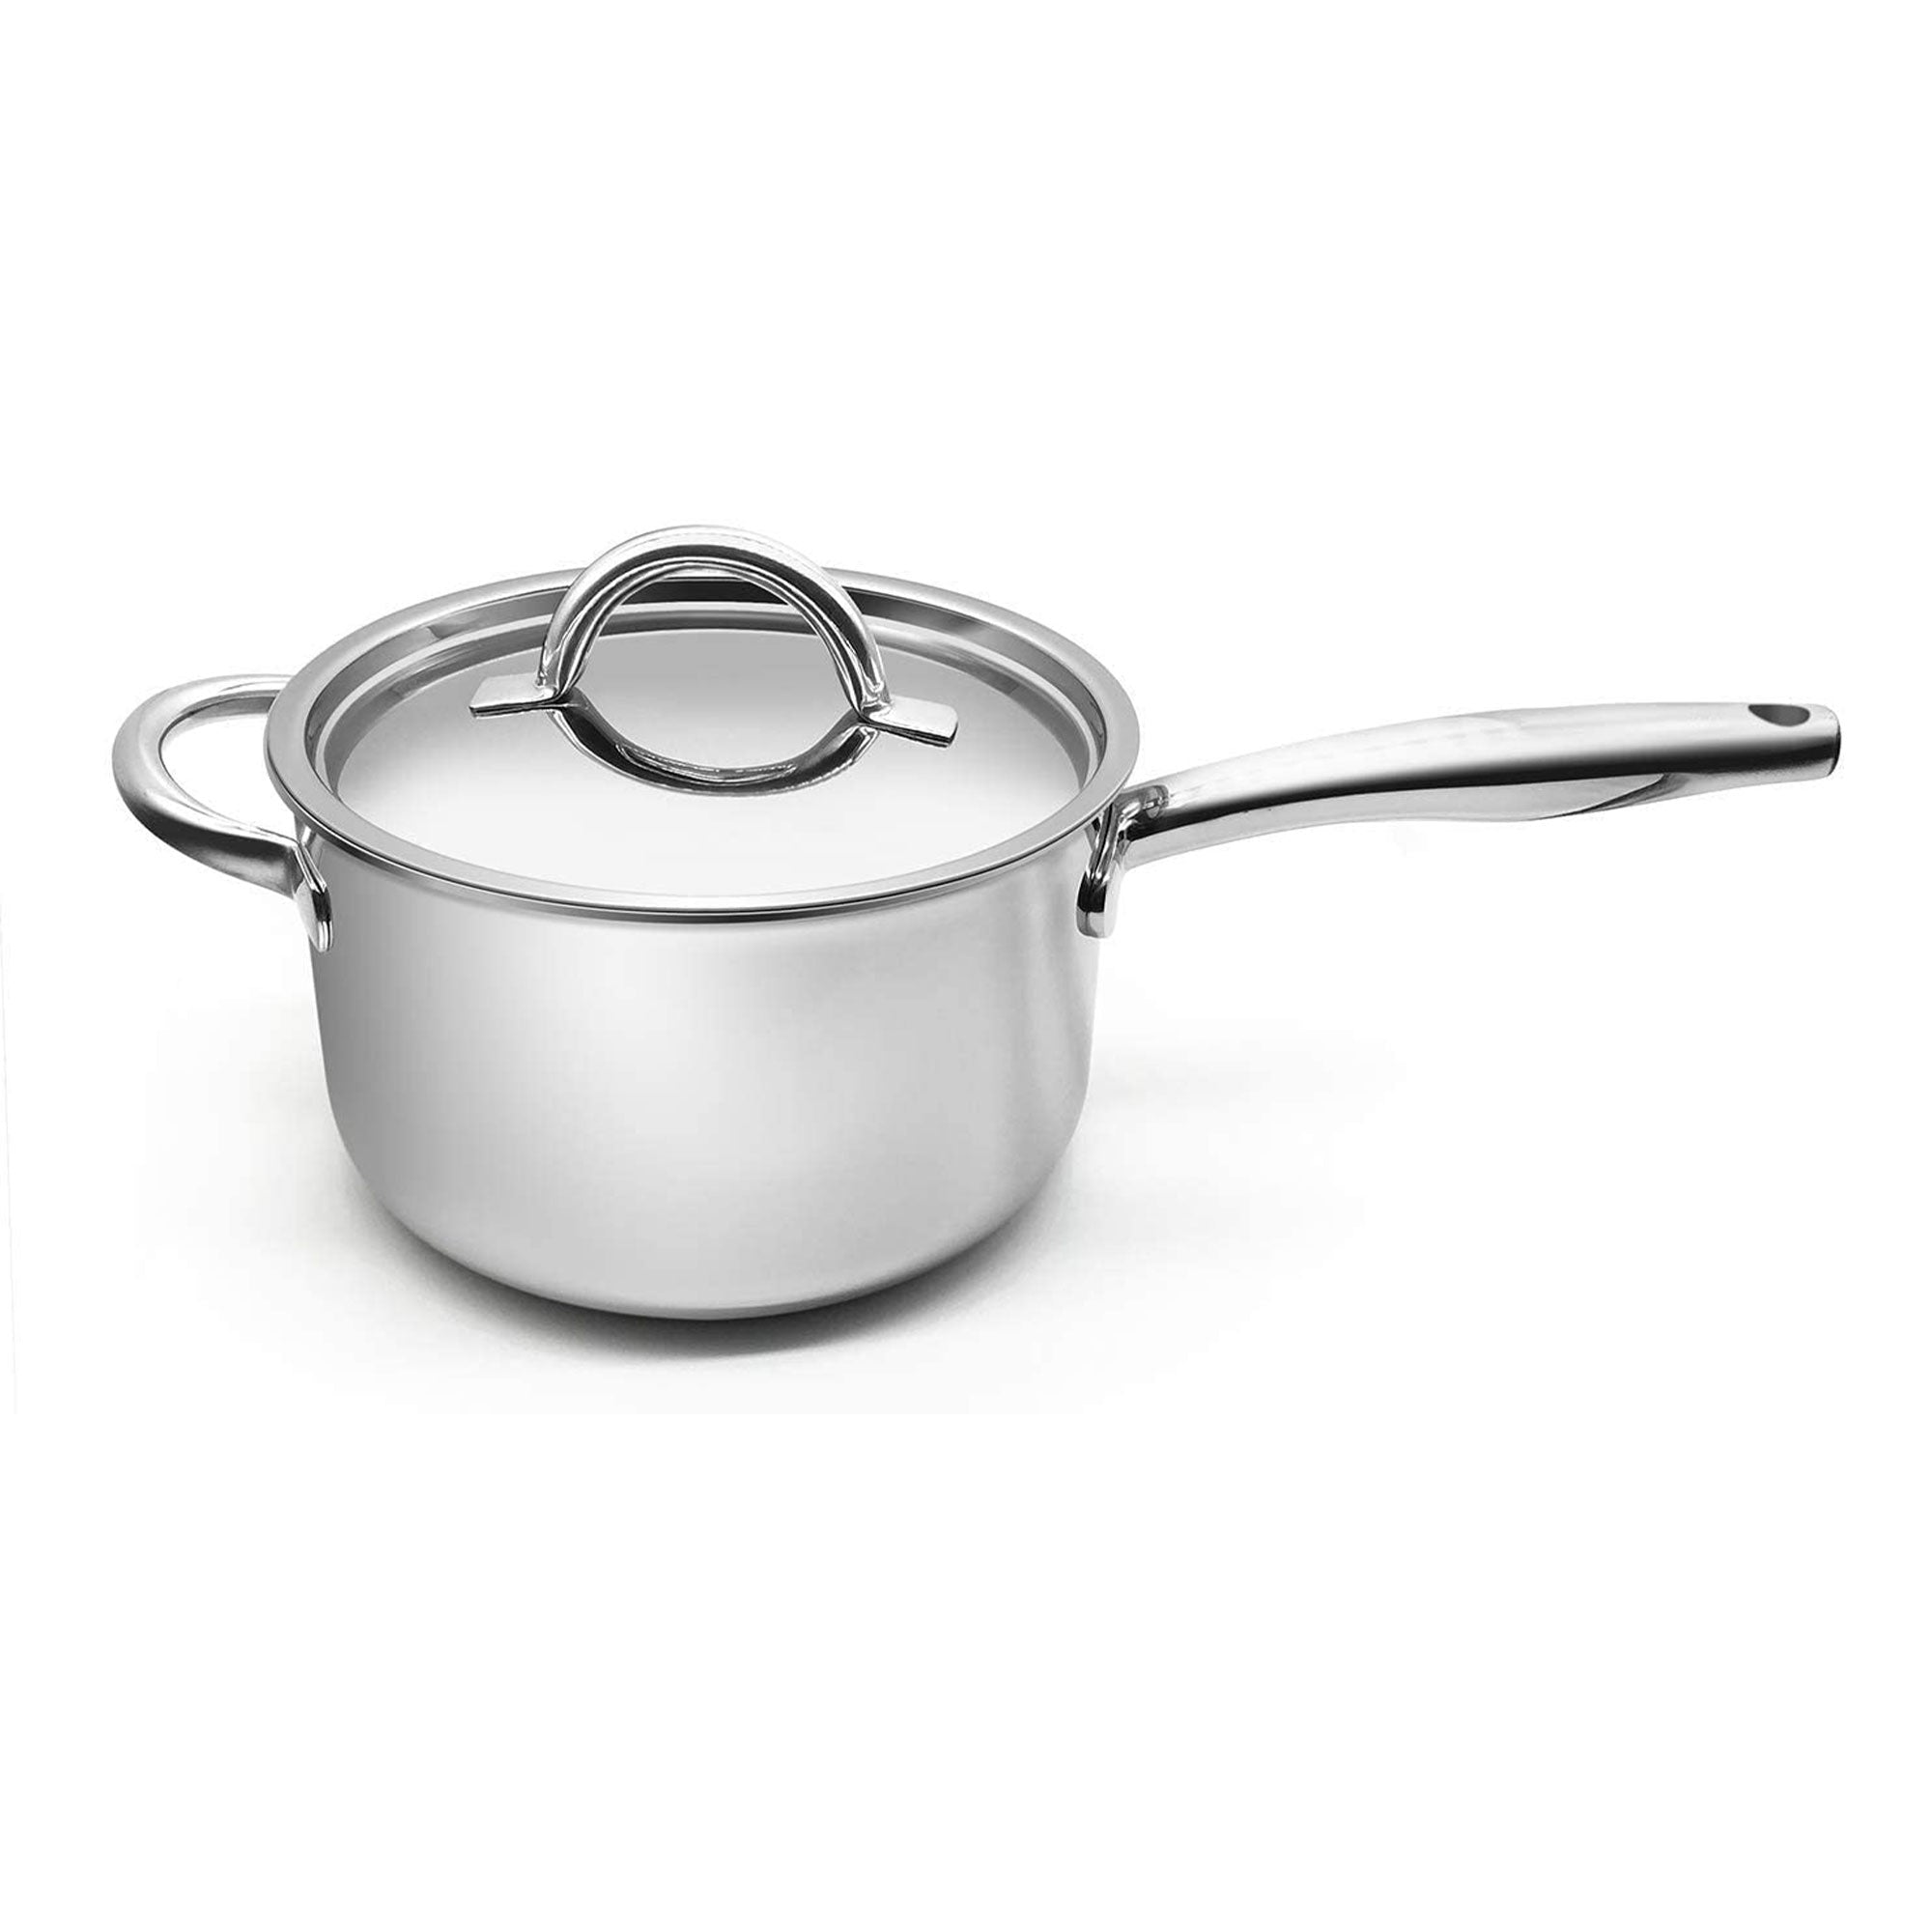 Fortune Candy 4-Quart Saucepan with Lid, Tri-Ply, 18/8 Stainless Steel,  Dishwasher Safe, Induction Ready, Mirror Finish (18/8 Steel)